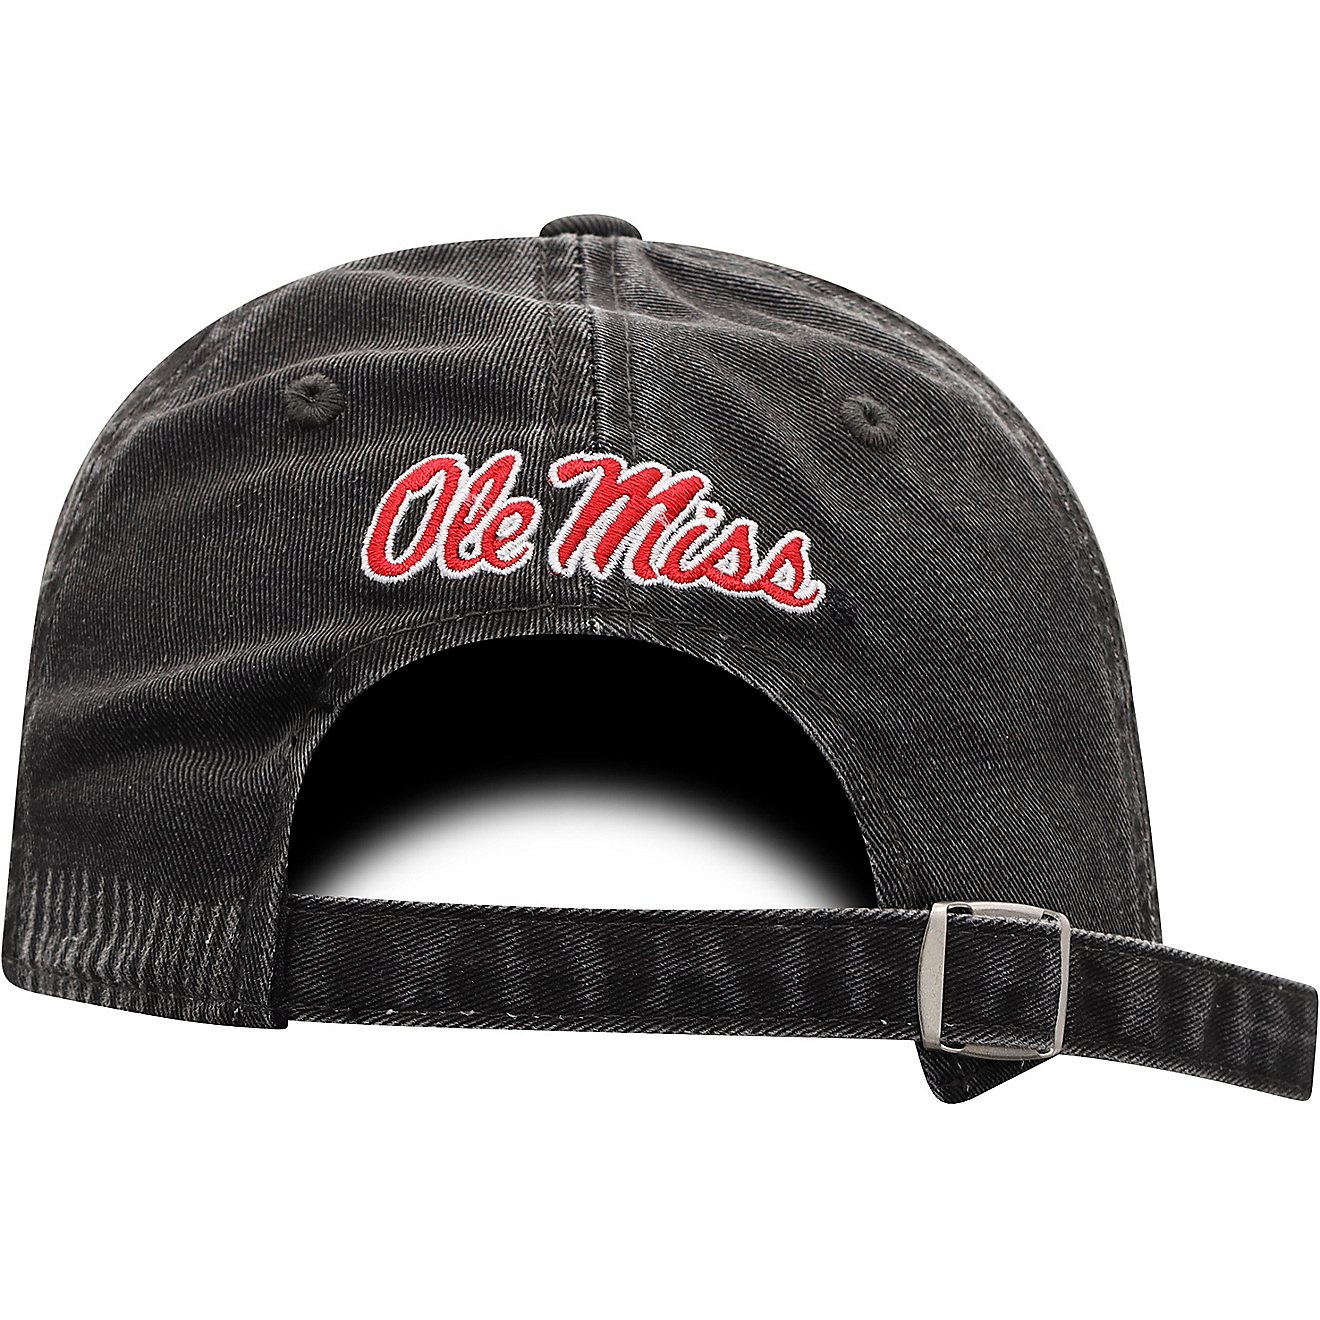 Top of the World Women's University of Mississippi Sola Adjustable Hat                                                           - view number 4